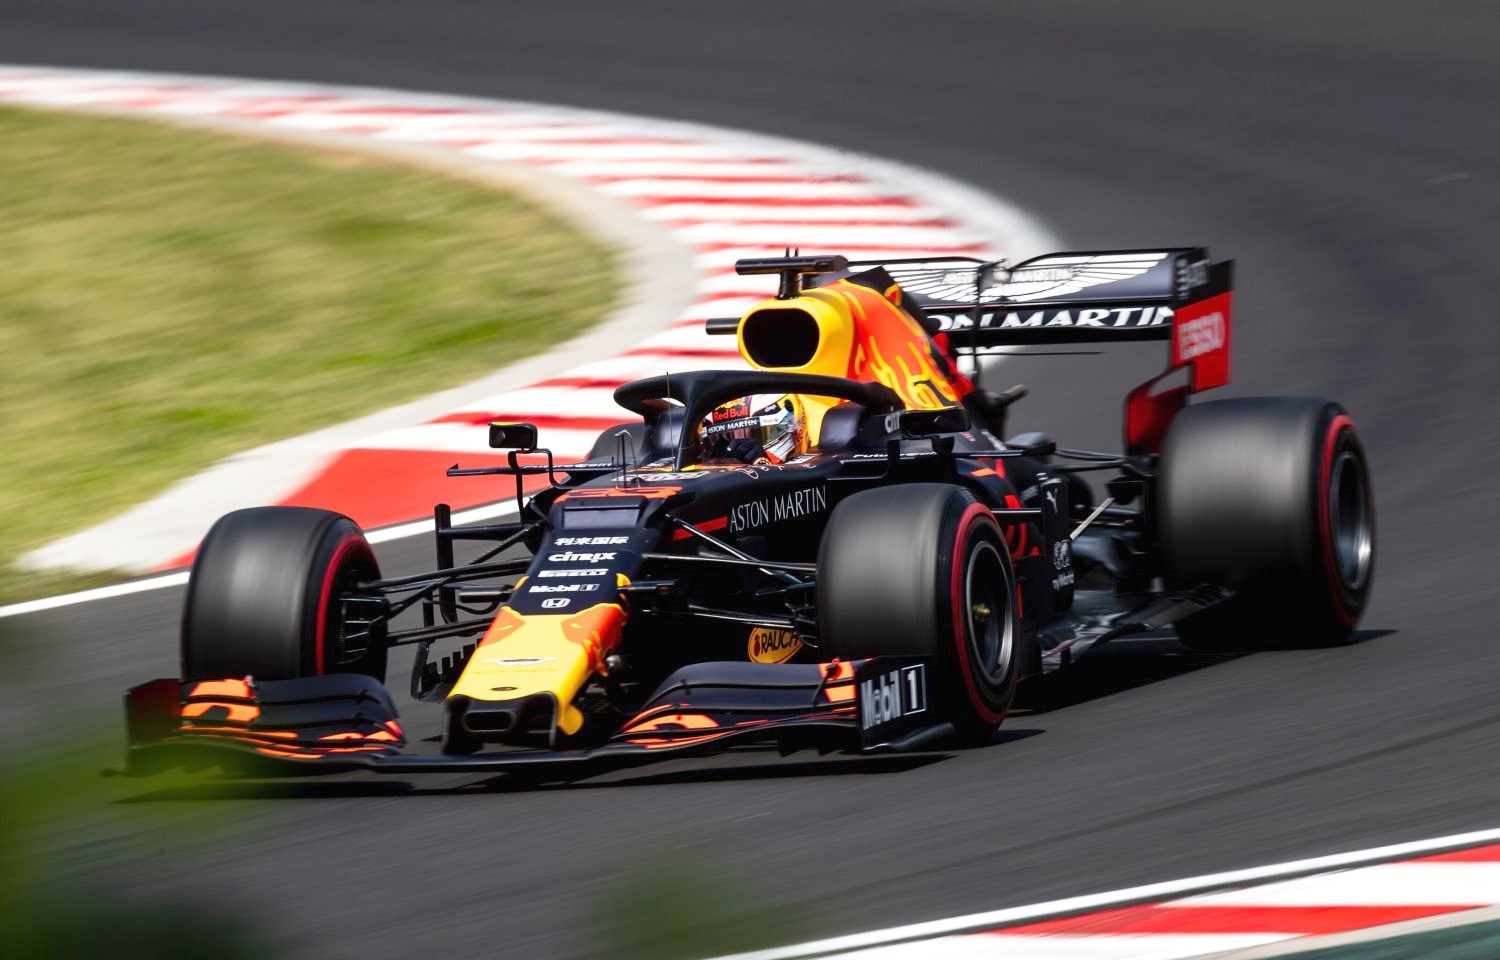 Verstappen and Honda coming on strong